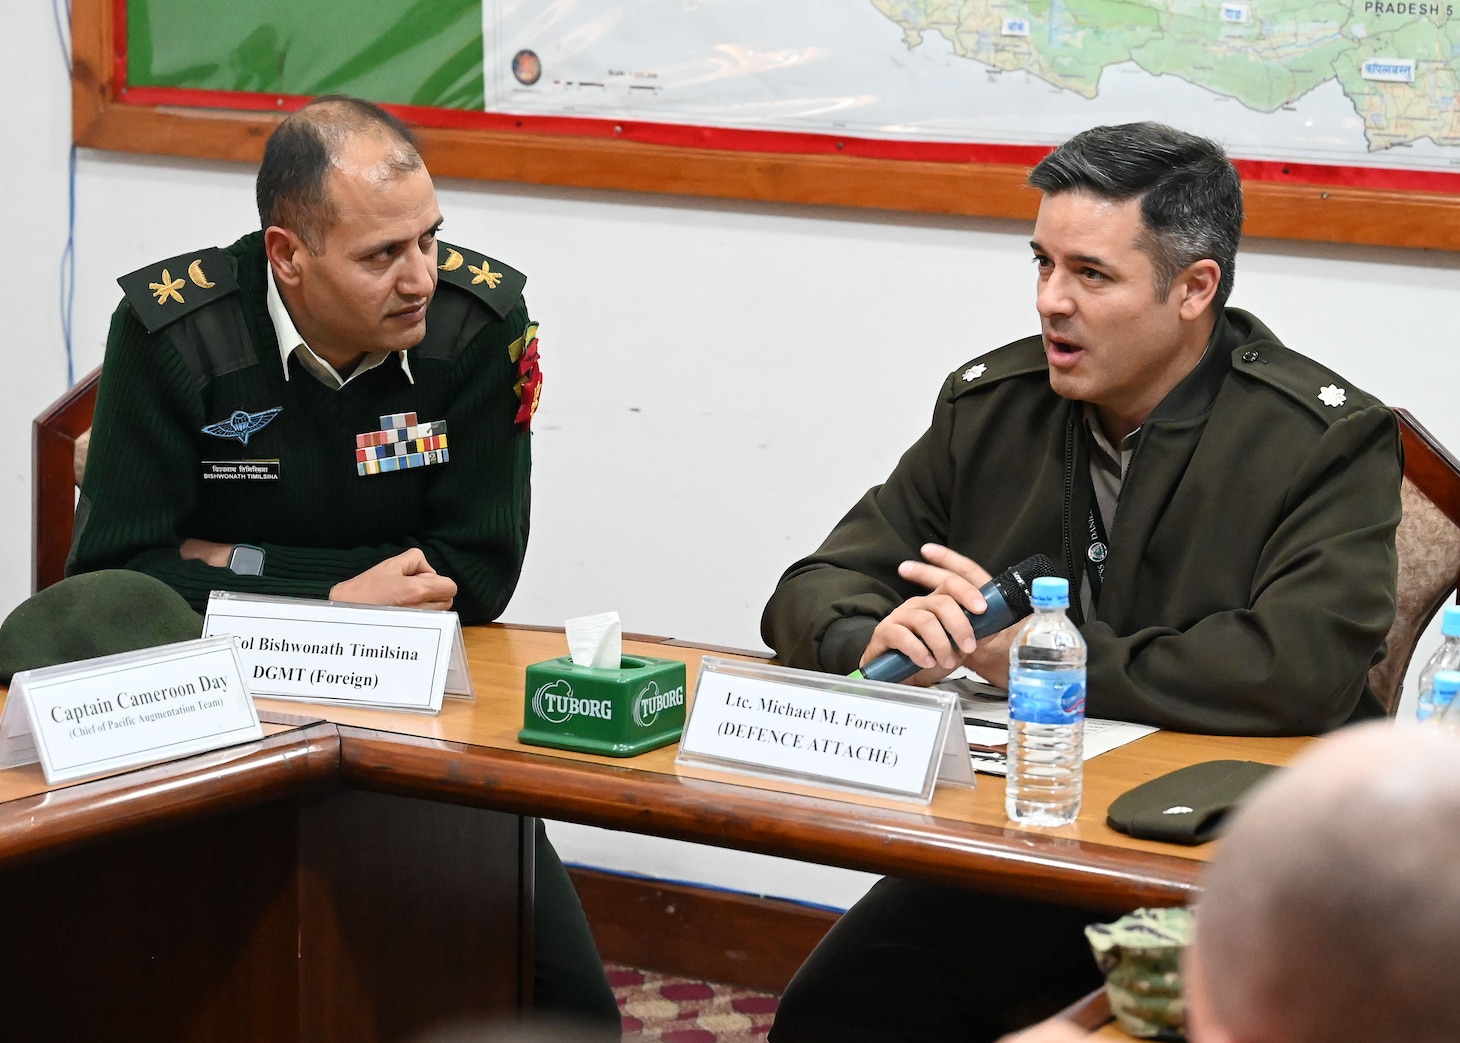 U.S. Army Lt. Col. Micheal M. Forester, right, U.S. Defense Attaché to Nepal, and Lt. Col. Bishwonath Timilsina, Director General of Military Training (Foreign), Nepali Army, speak during the closing remarks of a U.S. and Nepal subject matter expert exchange at Ganesh Kashya, the Nepali Army headquarters in Kathmandu, Nepal. Naval Special Warfare trains with forces worldwide to improve and further specialize skills required to conduct missions and respond to crises.